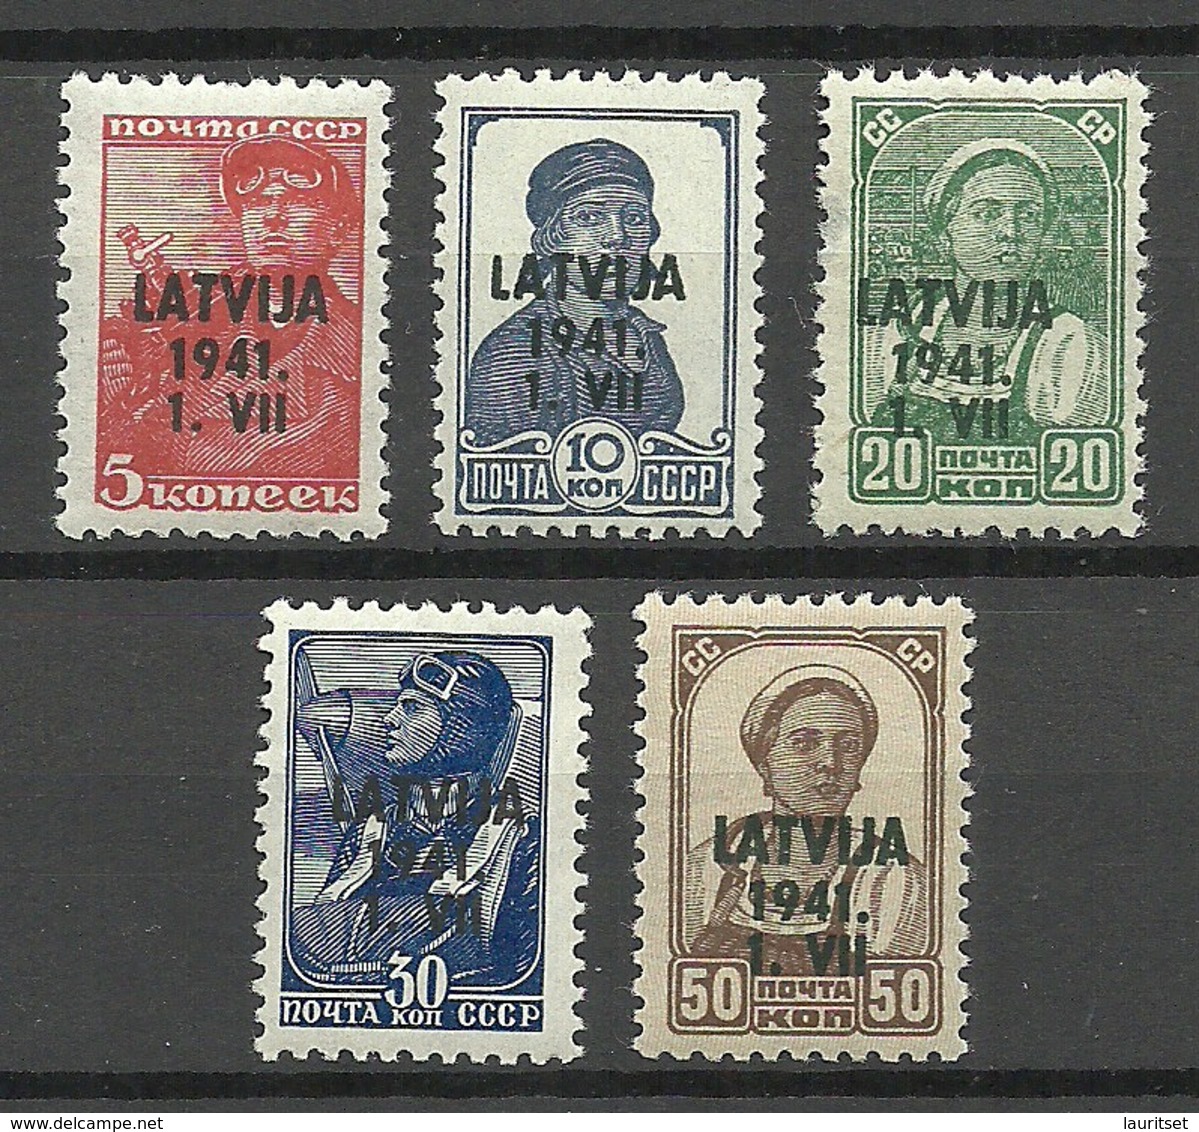 German Occupation Lettland Latvia 1941 = 5 Values From Michel 1 - 6 MNH (1 Stamp Without Gum) - Occupation 1938-45